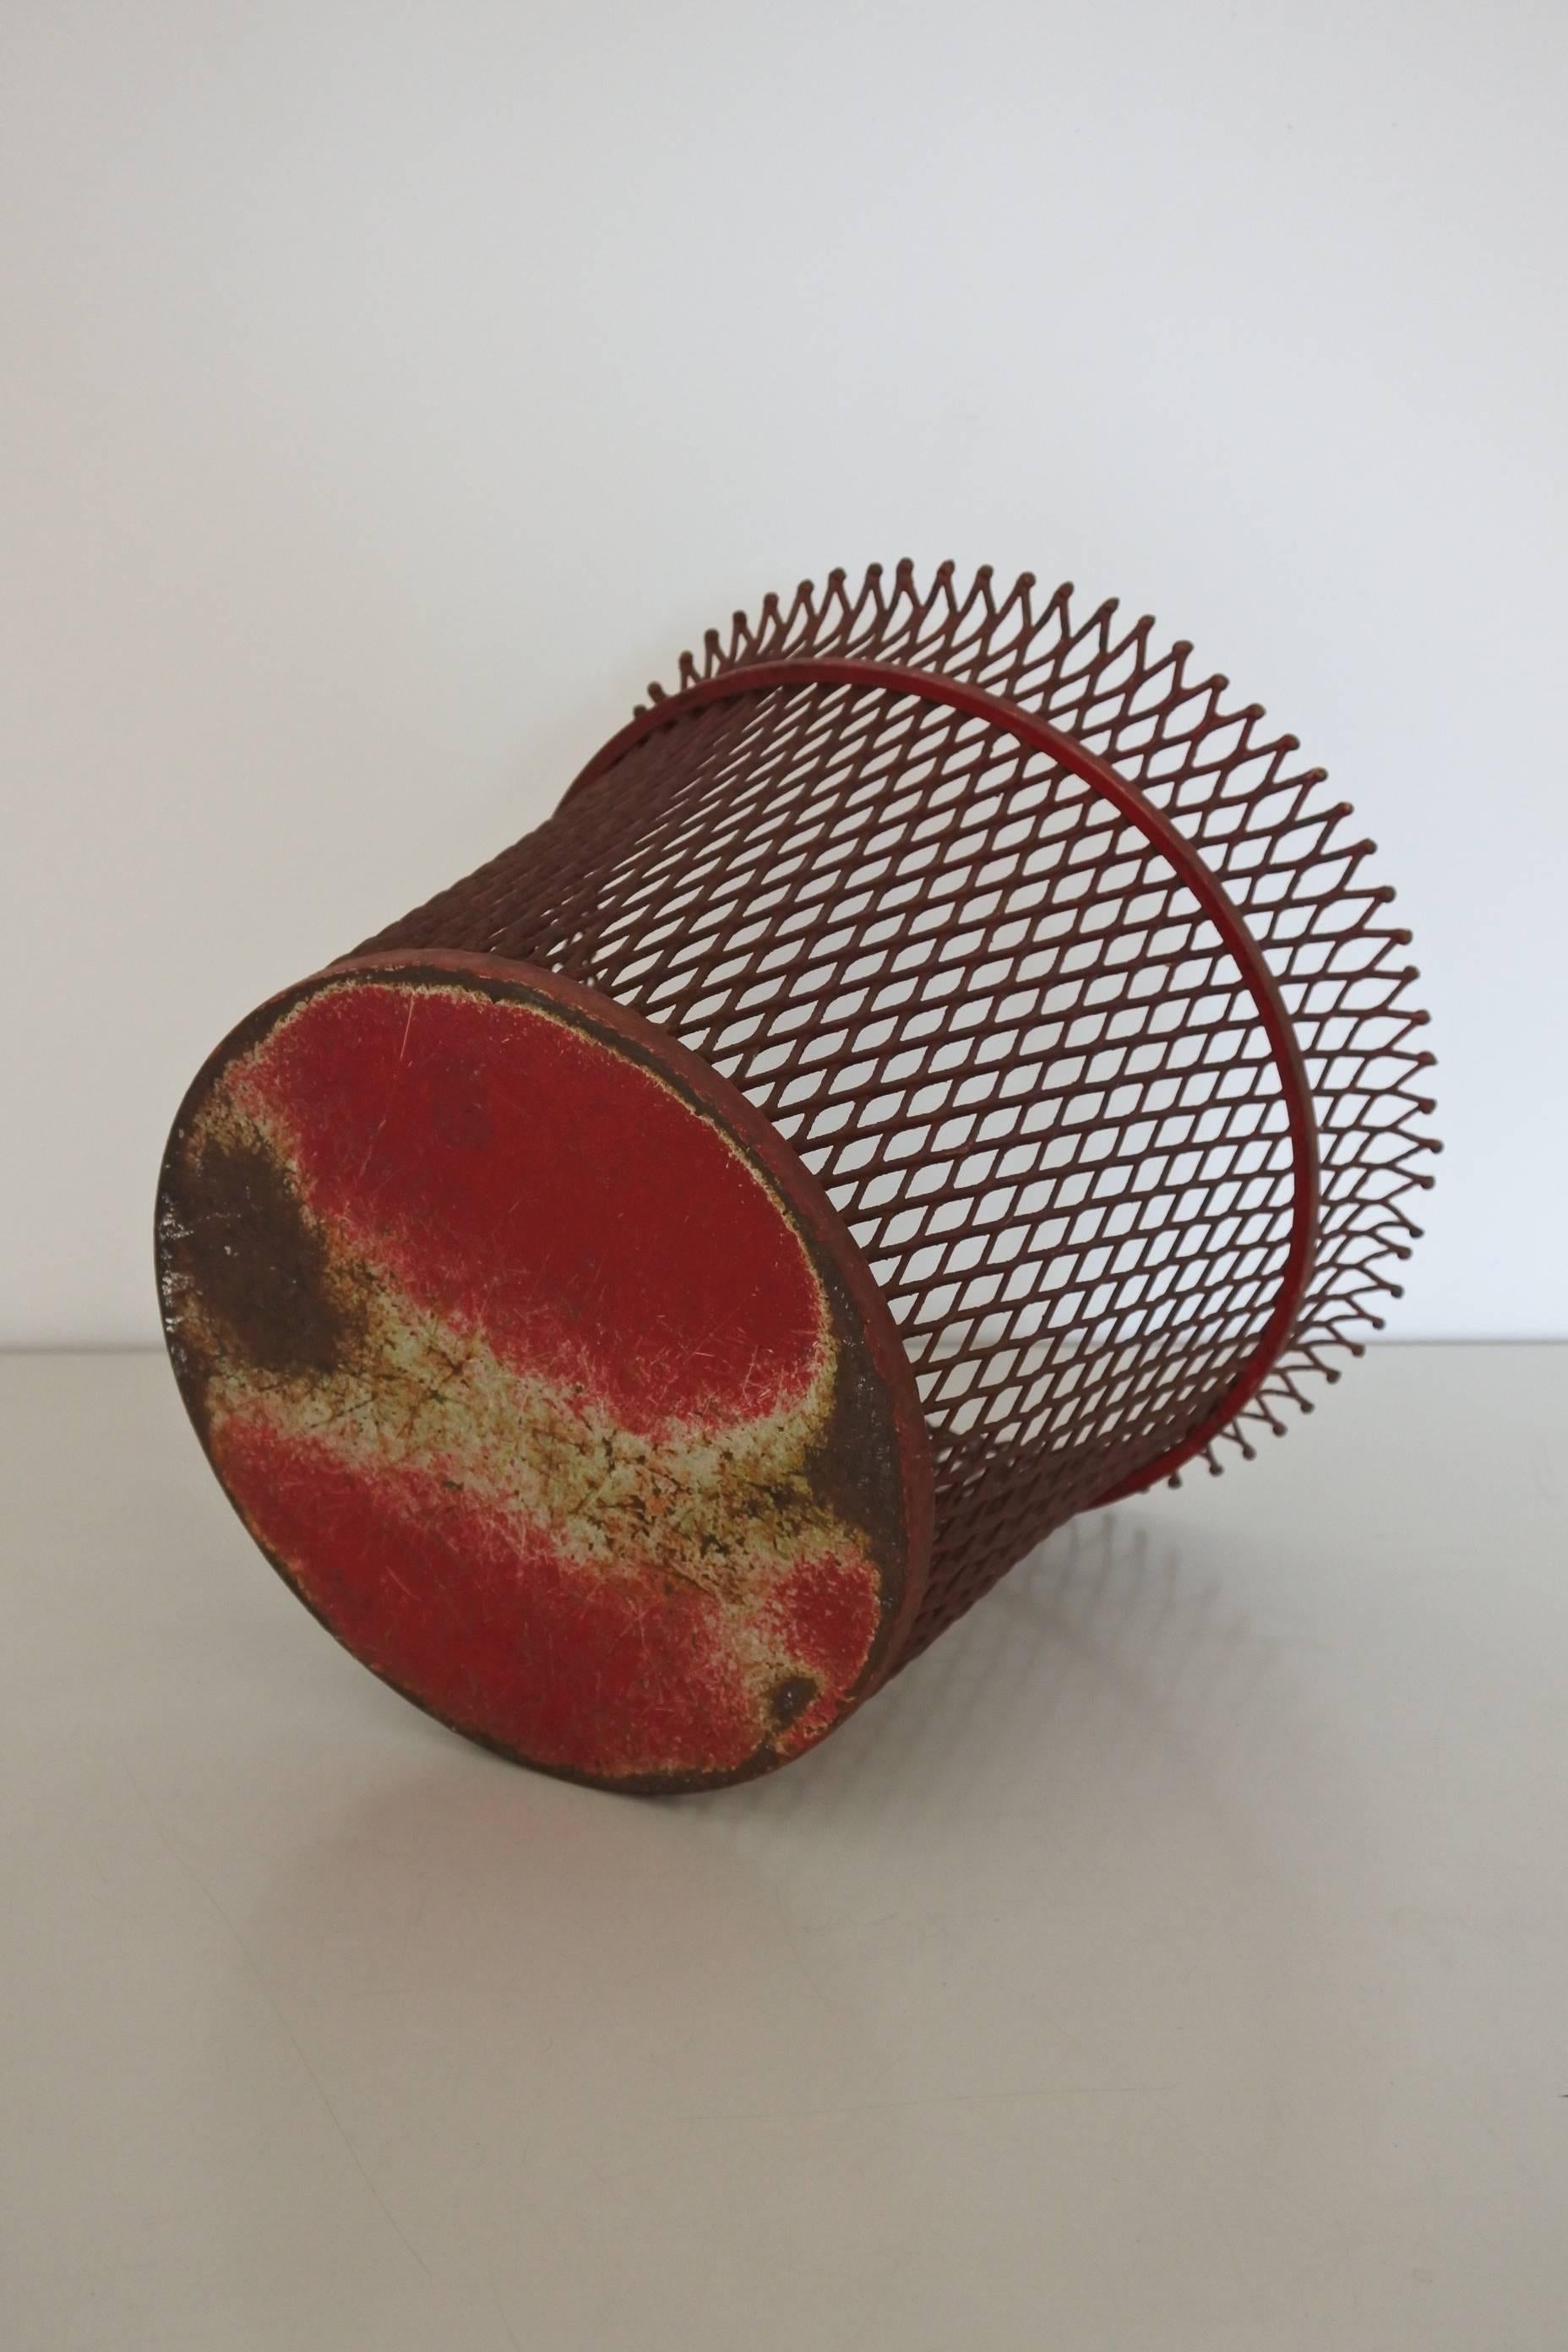 Midcentury wastepaper basket by French designer Mathieu Mategot. 
Red lacquered metal. Original lacquer.
It is documented in the book 